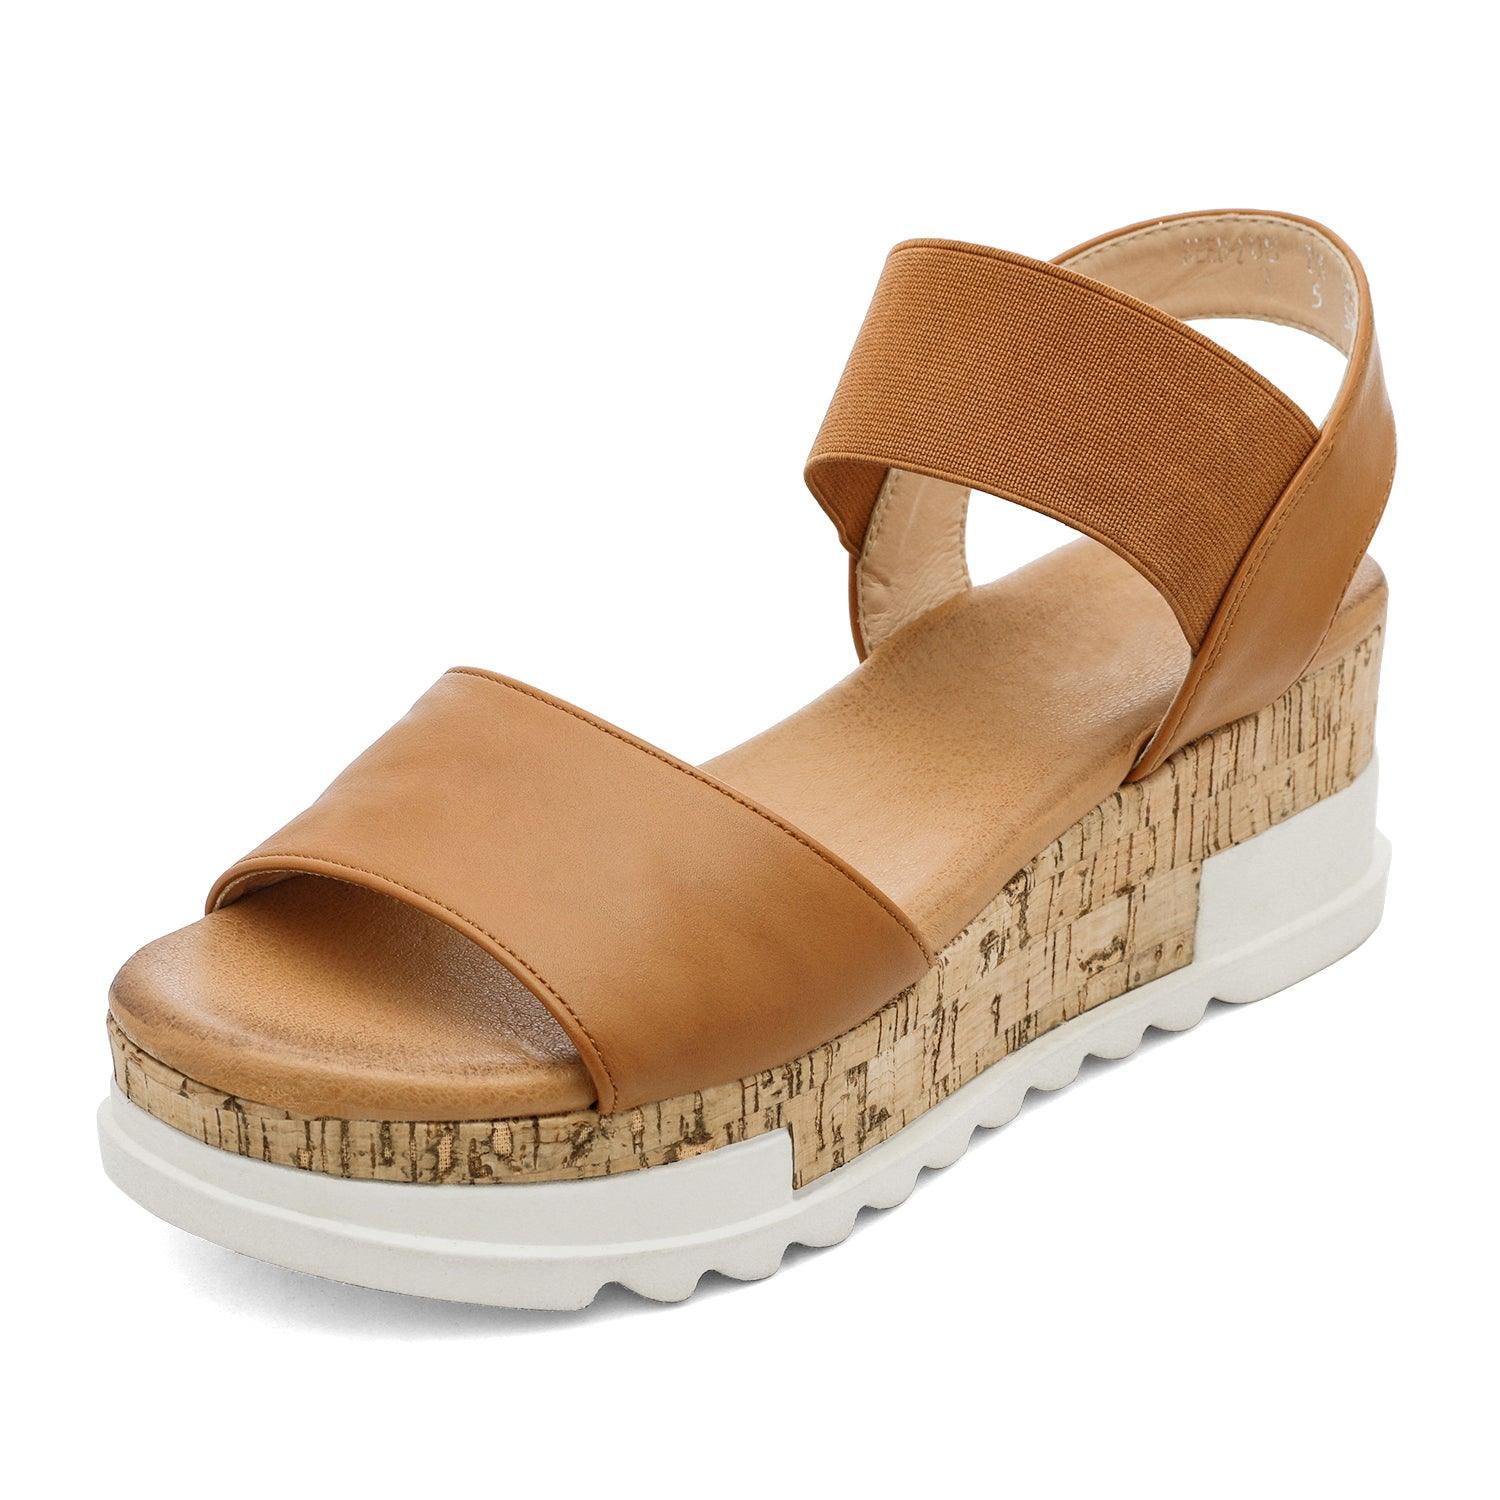 Women's Ankle Strap Open Toe Casual Platform Wedge Sandals - TheGivenGet